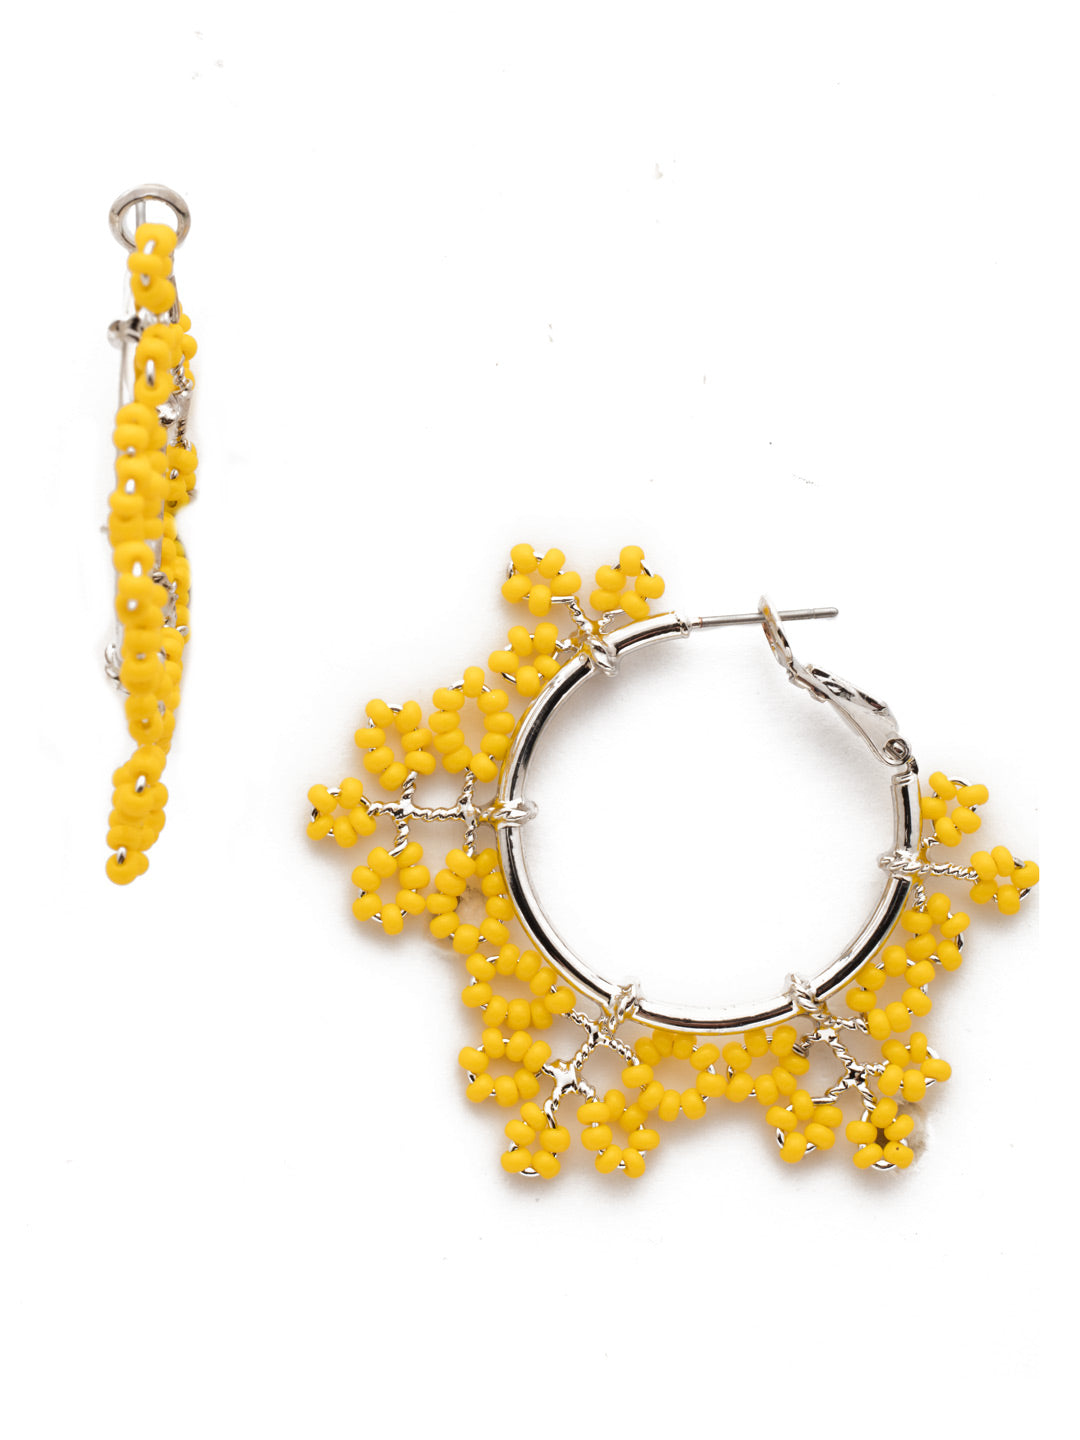 Sefina Large Hoop Earring - EEH8RHYEL - Make a statement in this pair of hoops covered in handcrafted beadwork. From Sorrelli's Bright Yellow collection in our Palladium Silver-tone finish.